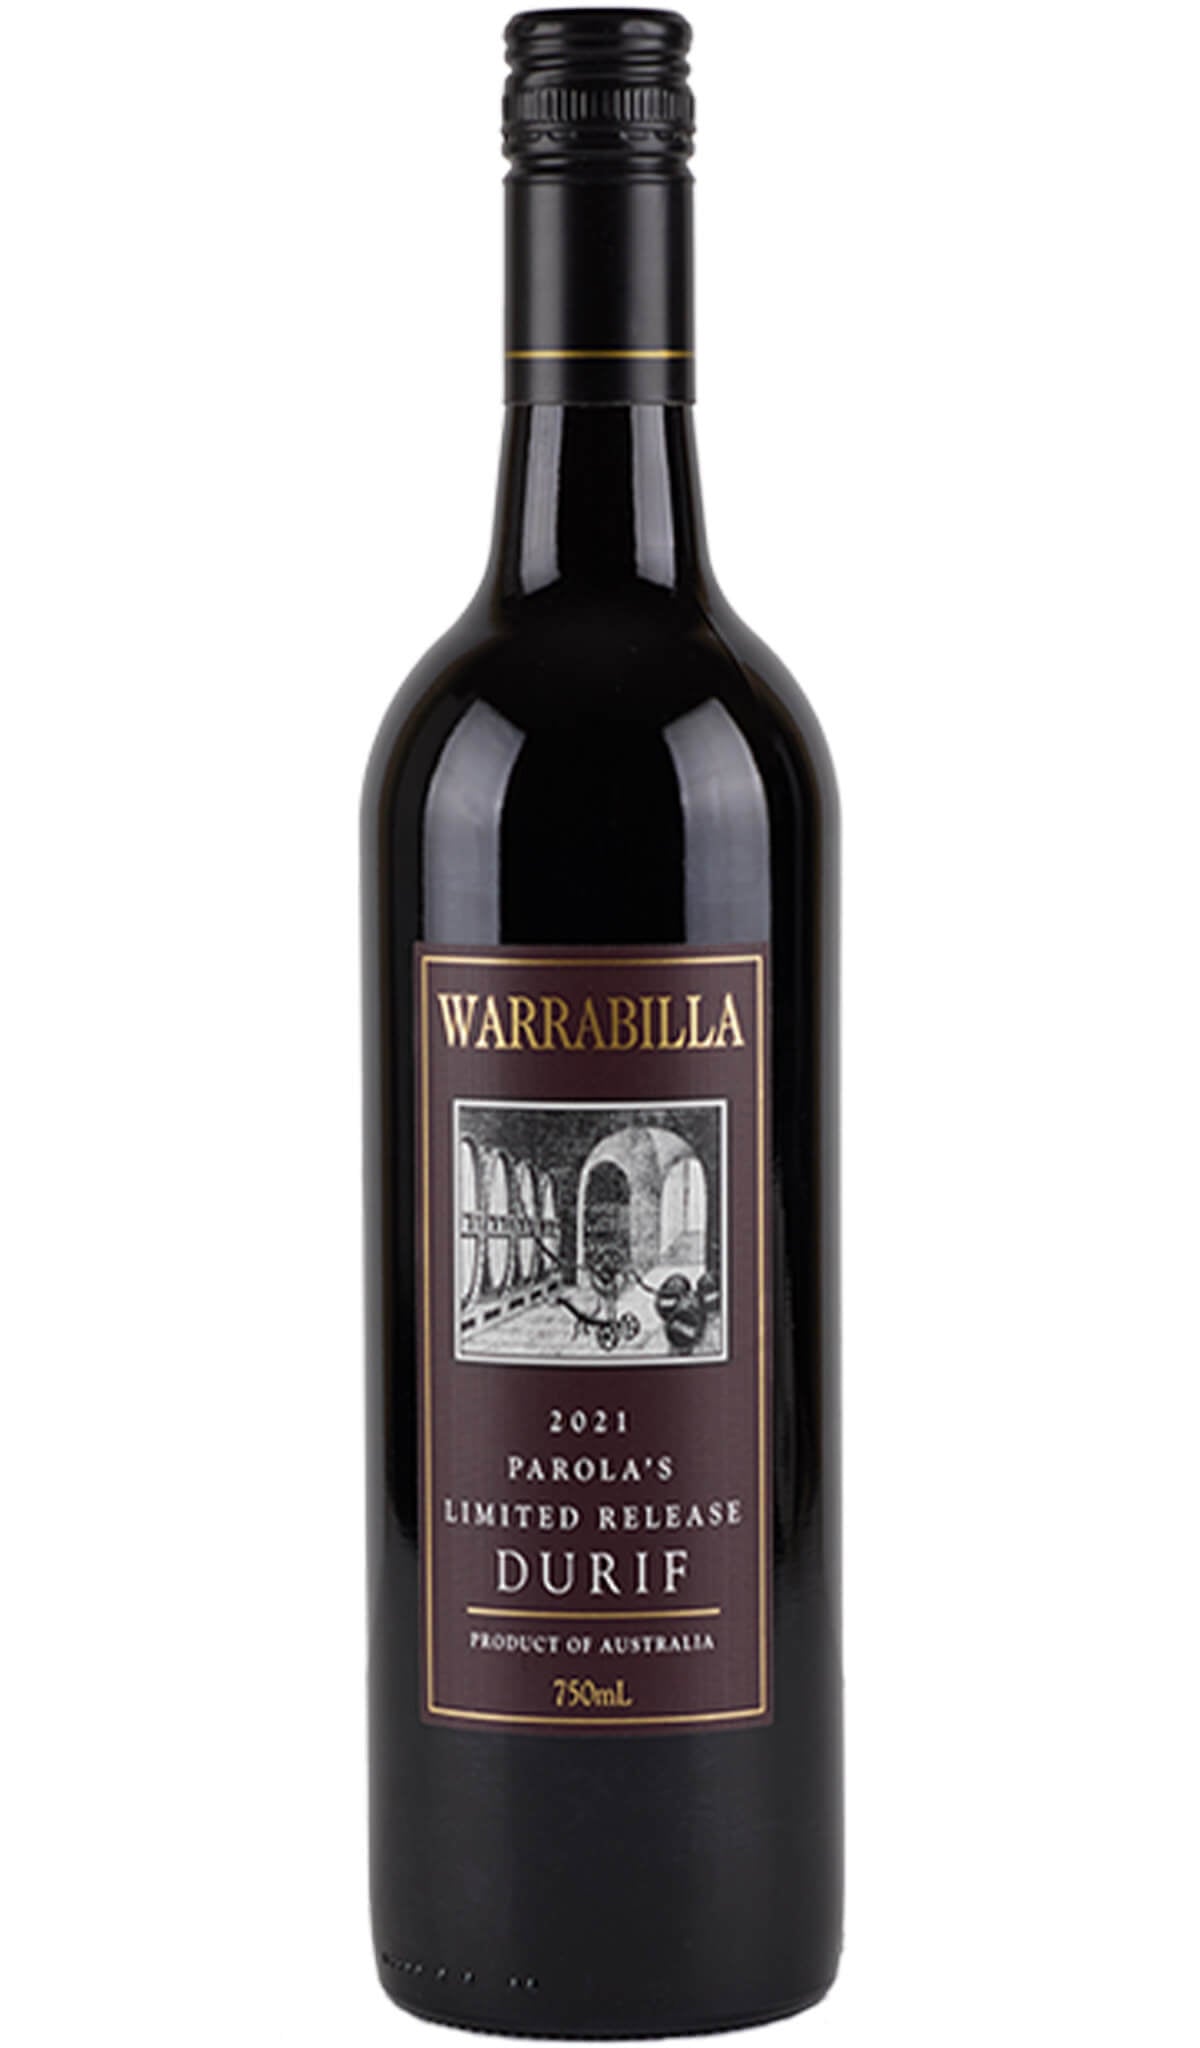 Find out more, explore the range and purchase Warrabilla Parola's Durif 2021 (Rutherglen) available online at Wine Sellers Direct - Australia's independent liquor specialists.